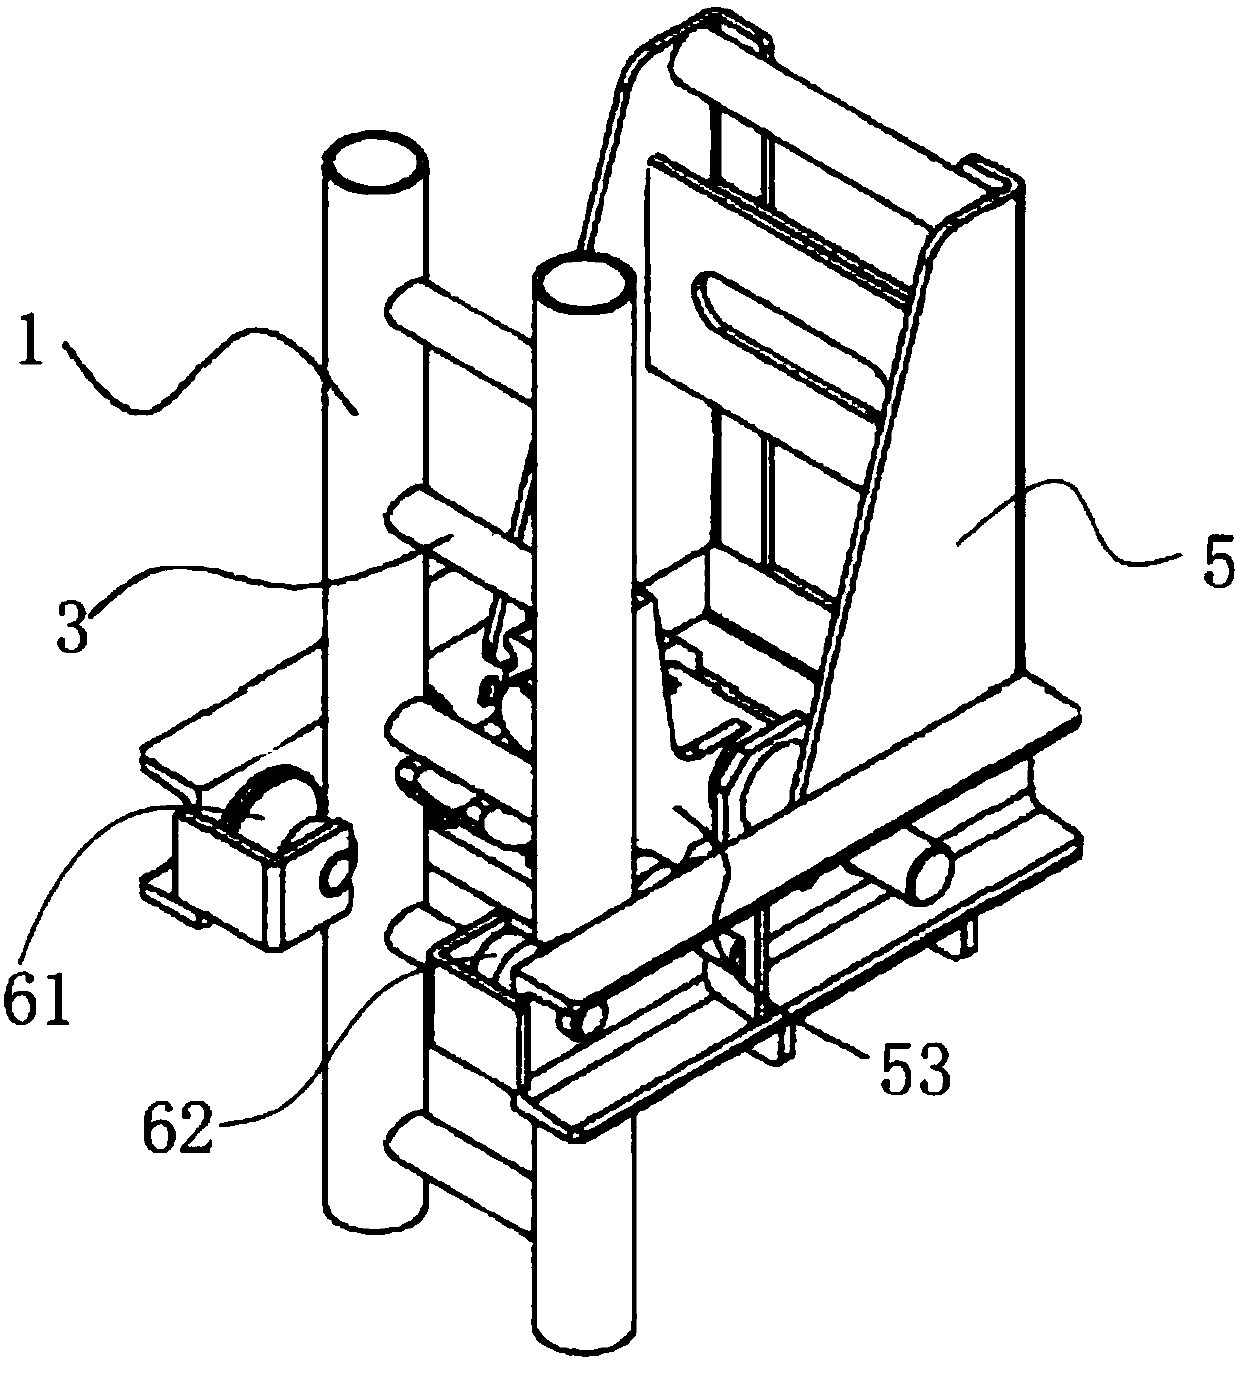 Attached lifting scaffold guide rail